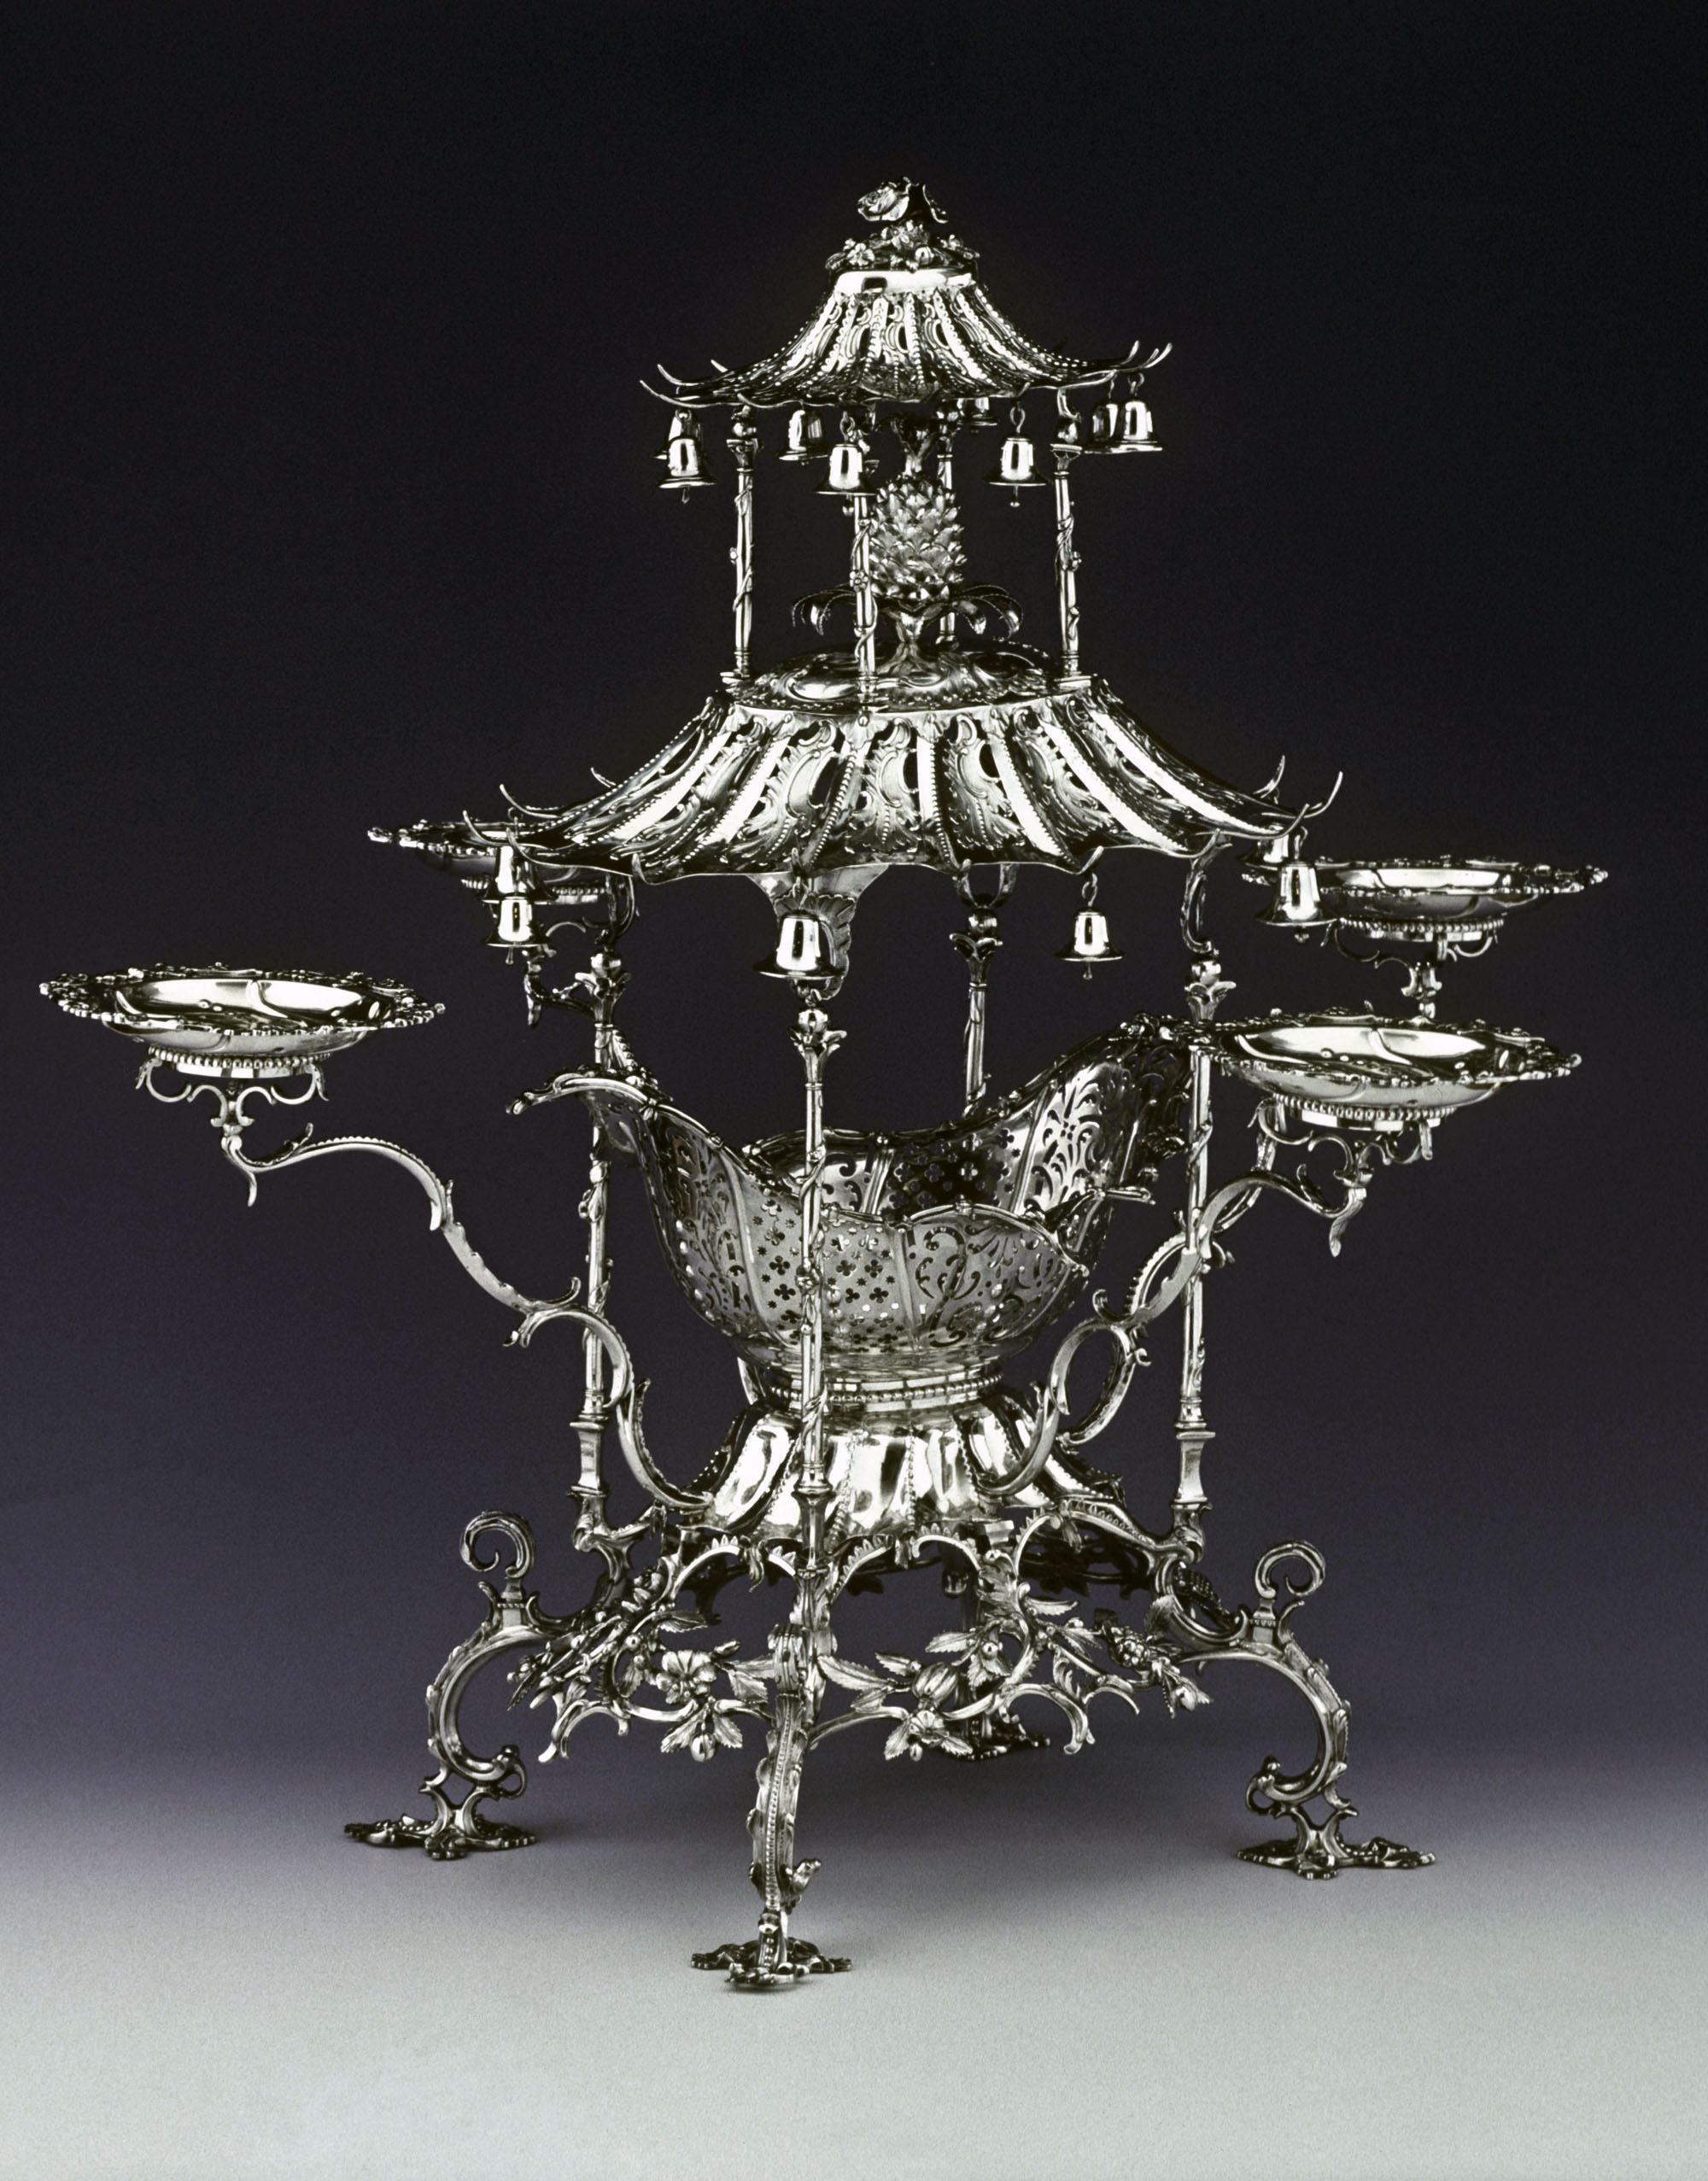 Epergne  marked by Thomas Pitts (active c. 1744-1793),  London, 1762-1763,  silver.  The Art Museums of Colonial Williamsburg, museum purchase, 1960-580